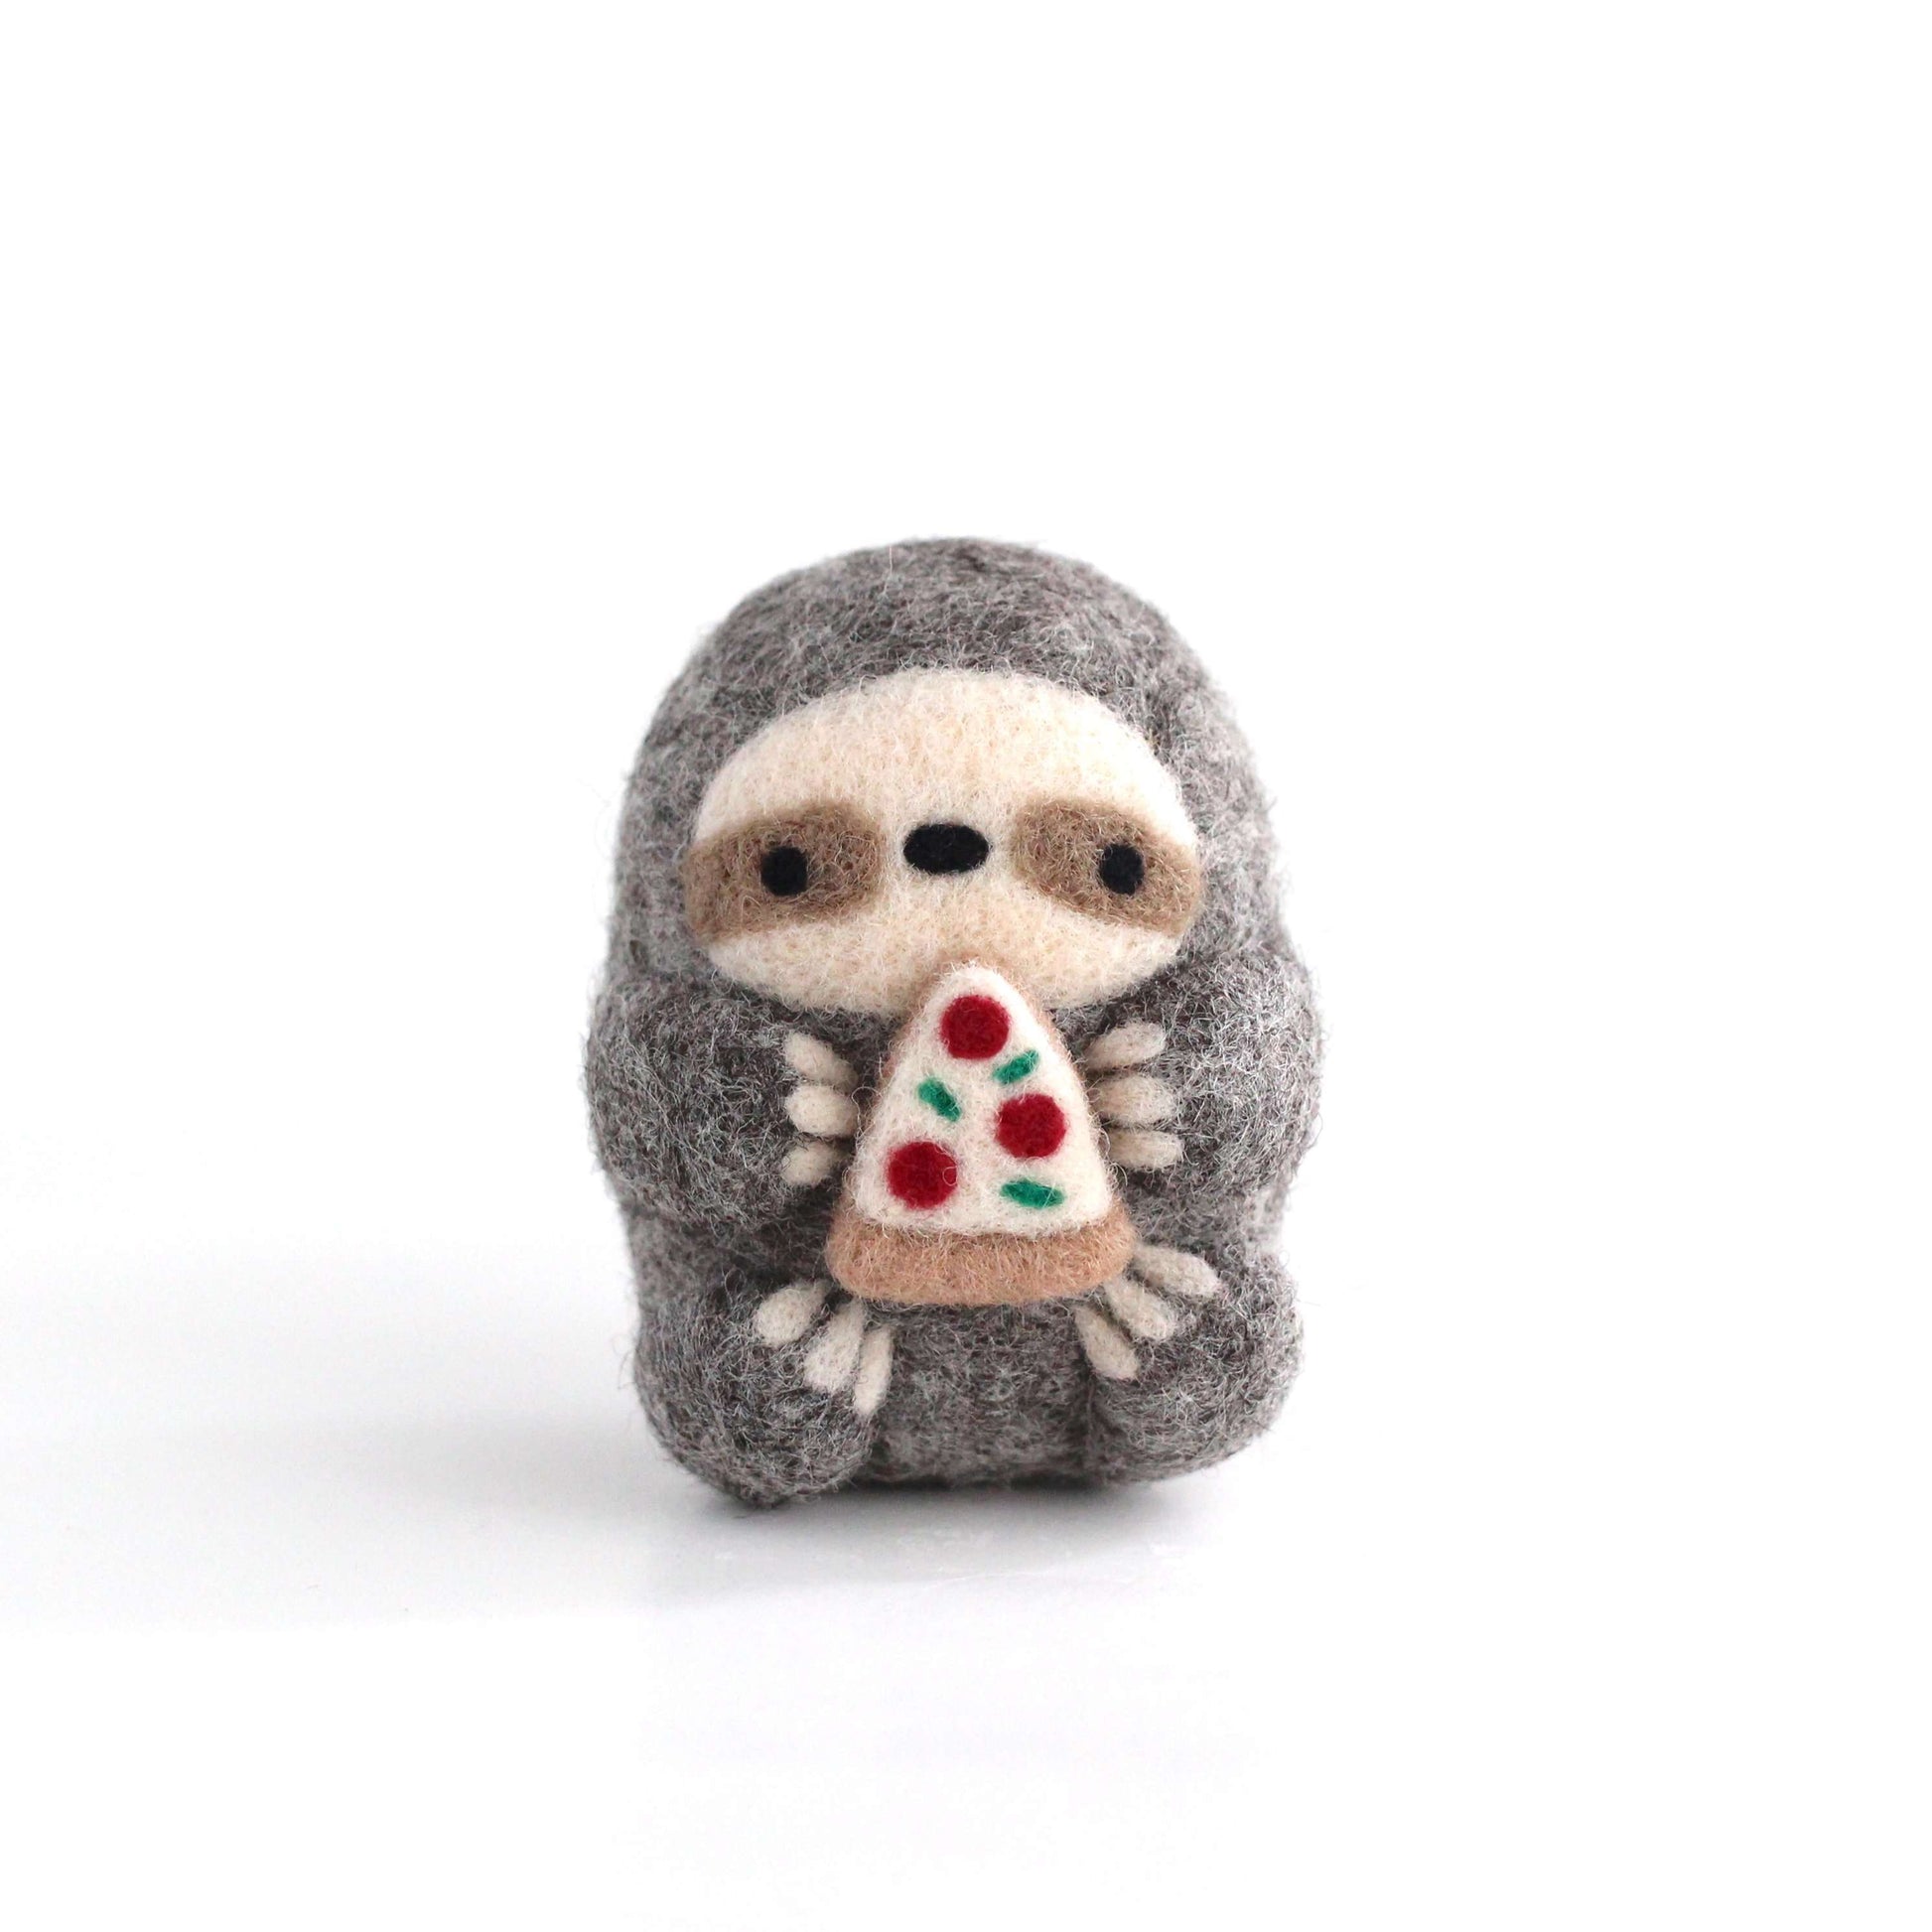 Needle Felted Sloth holding Pizza by Wild Whimsy Woolies